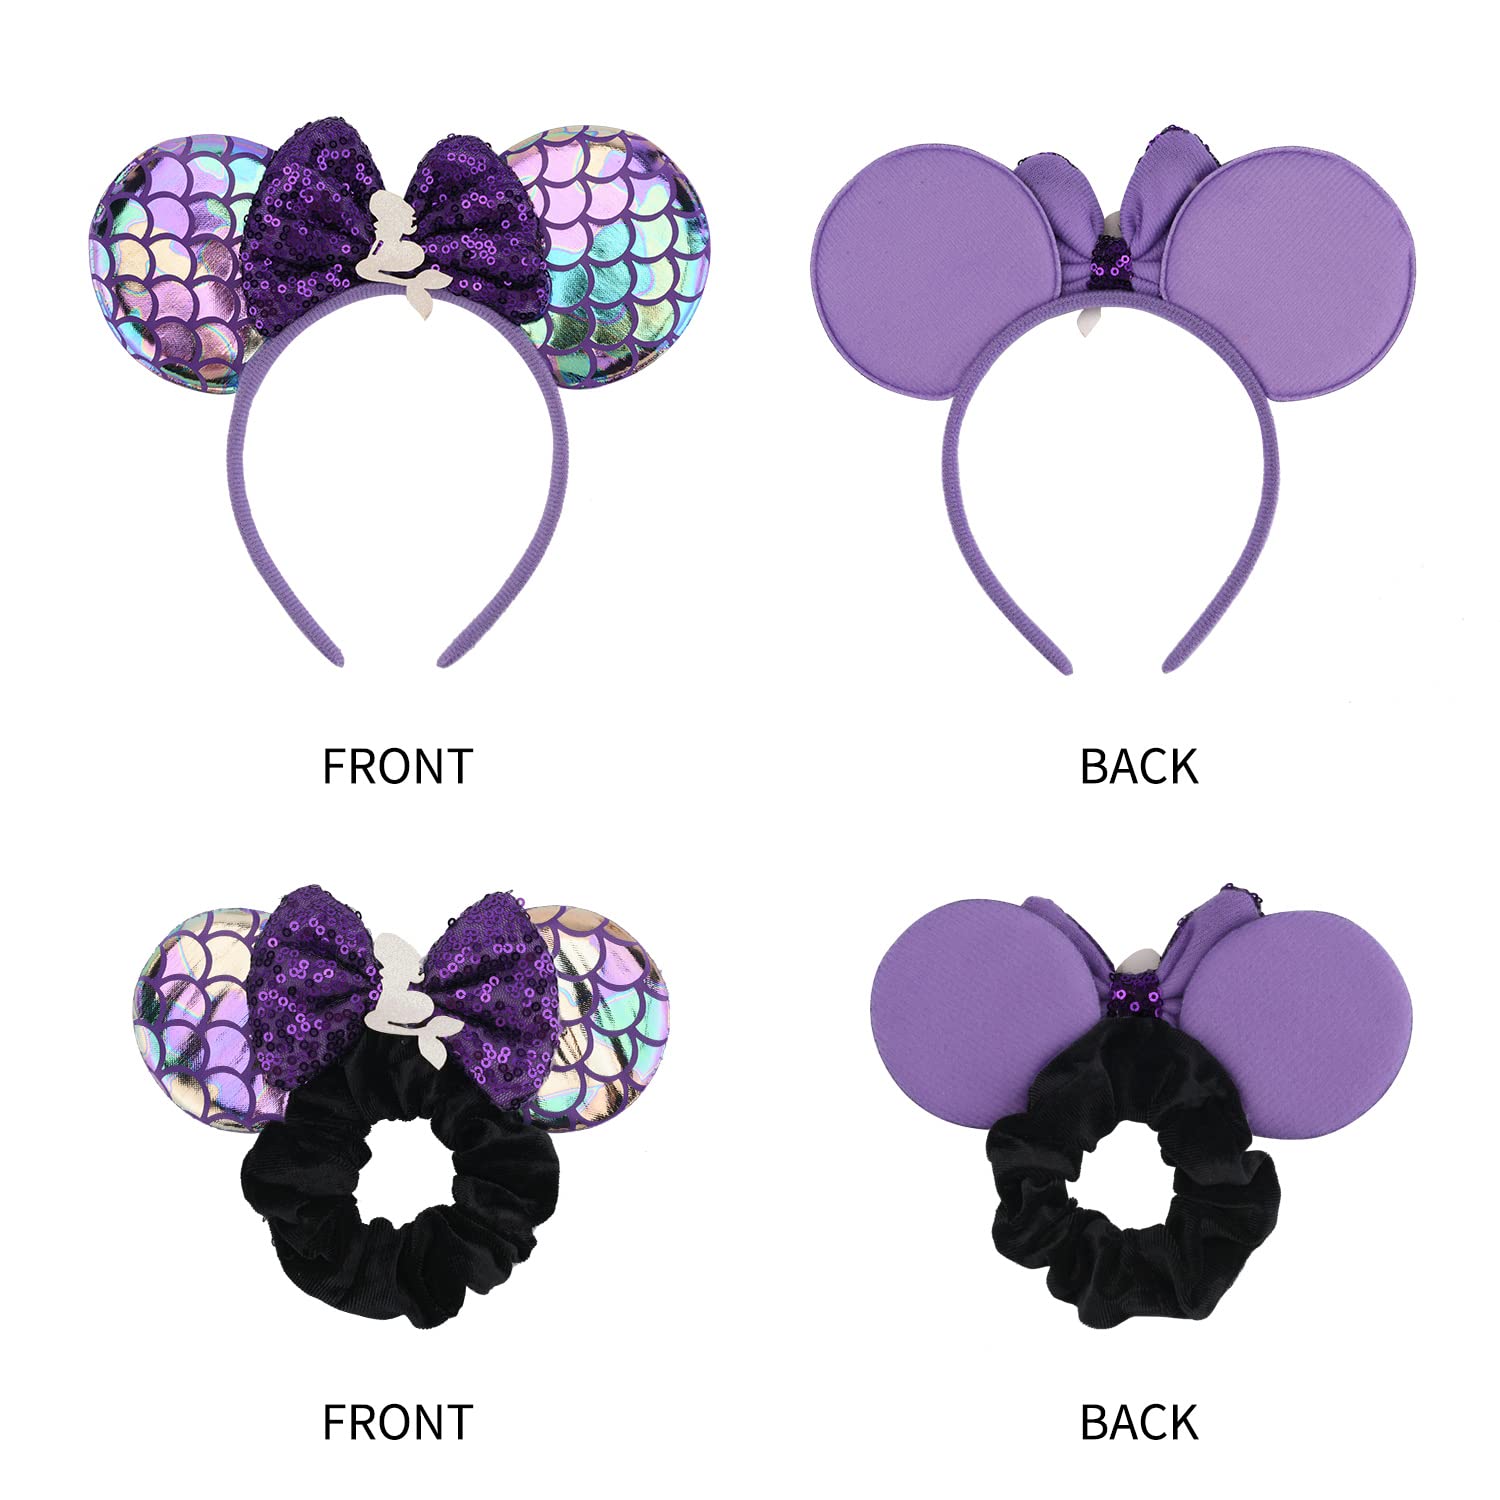 1 Pcs Shiny Mouse Ears Headband and 1 Pcs Sequin Mouse Ears Velvet Scrunchies with Bow Hairs Accessories for Girls Women Adult Kids Birthday Party(Mermaid)